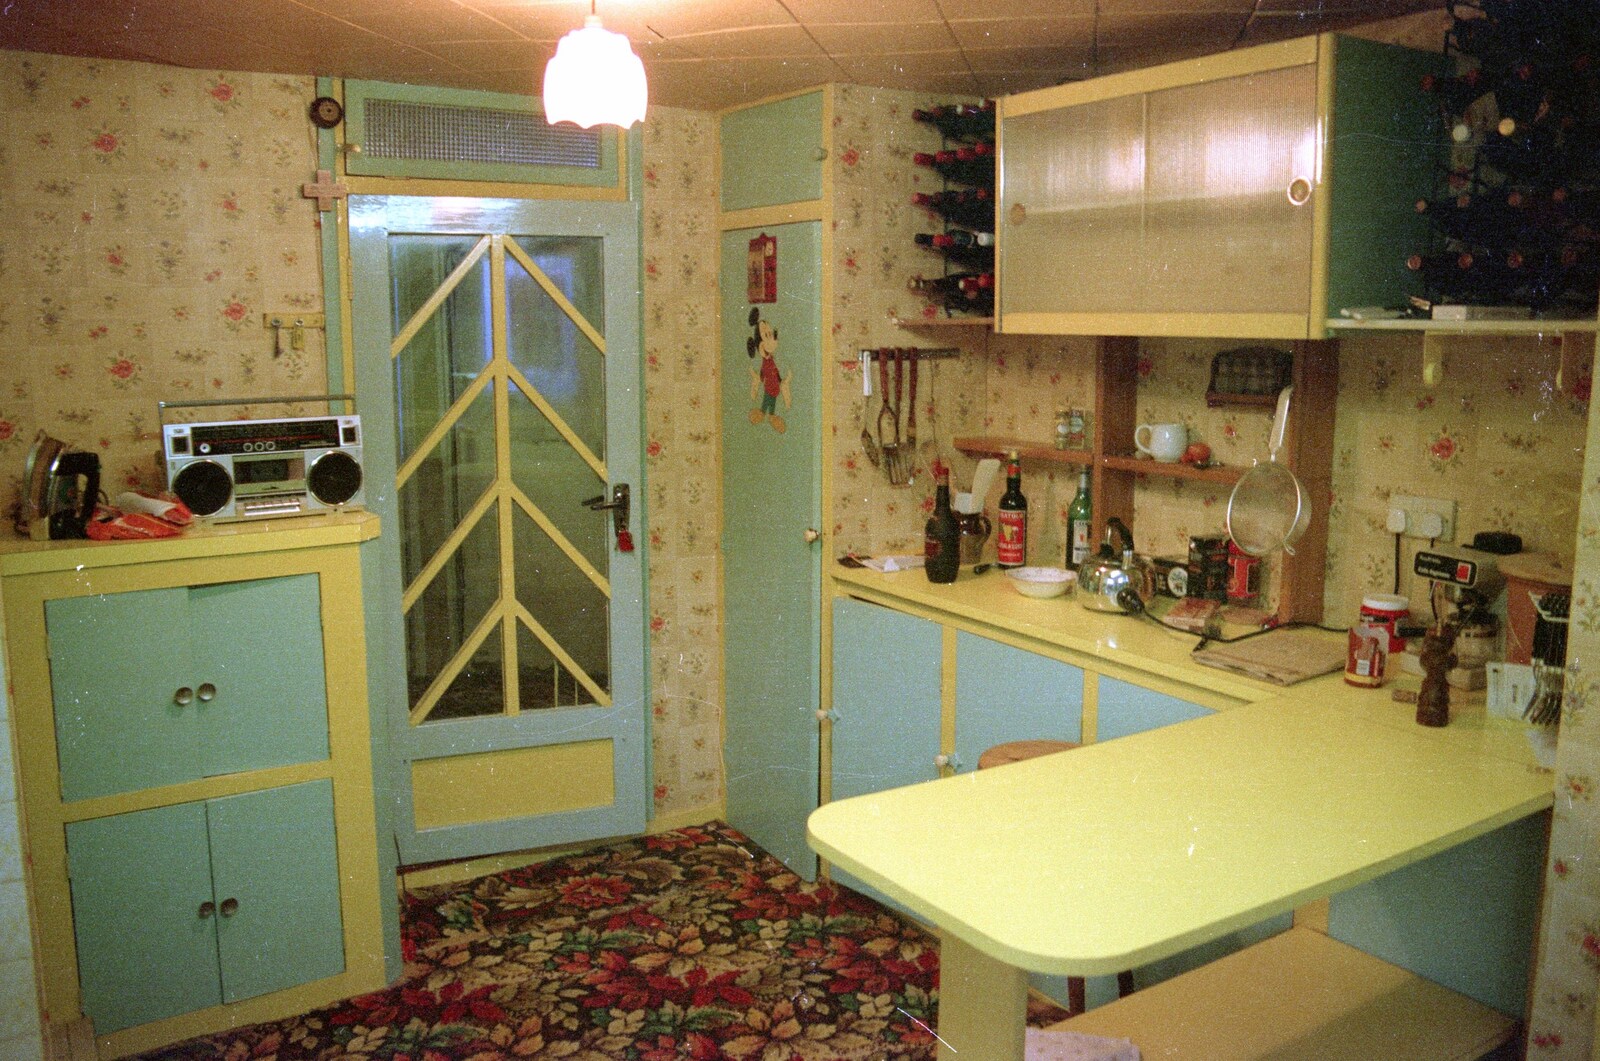 An amazingly-preserved 60s/70s kitchen from Bracken Way, Walkford, Dorset - 15th September 1986